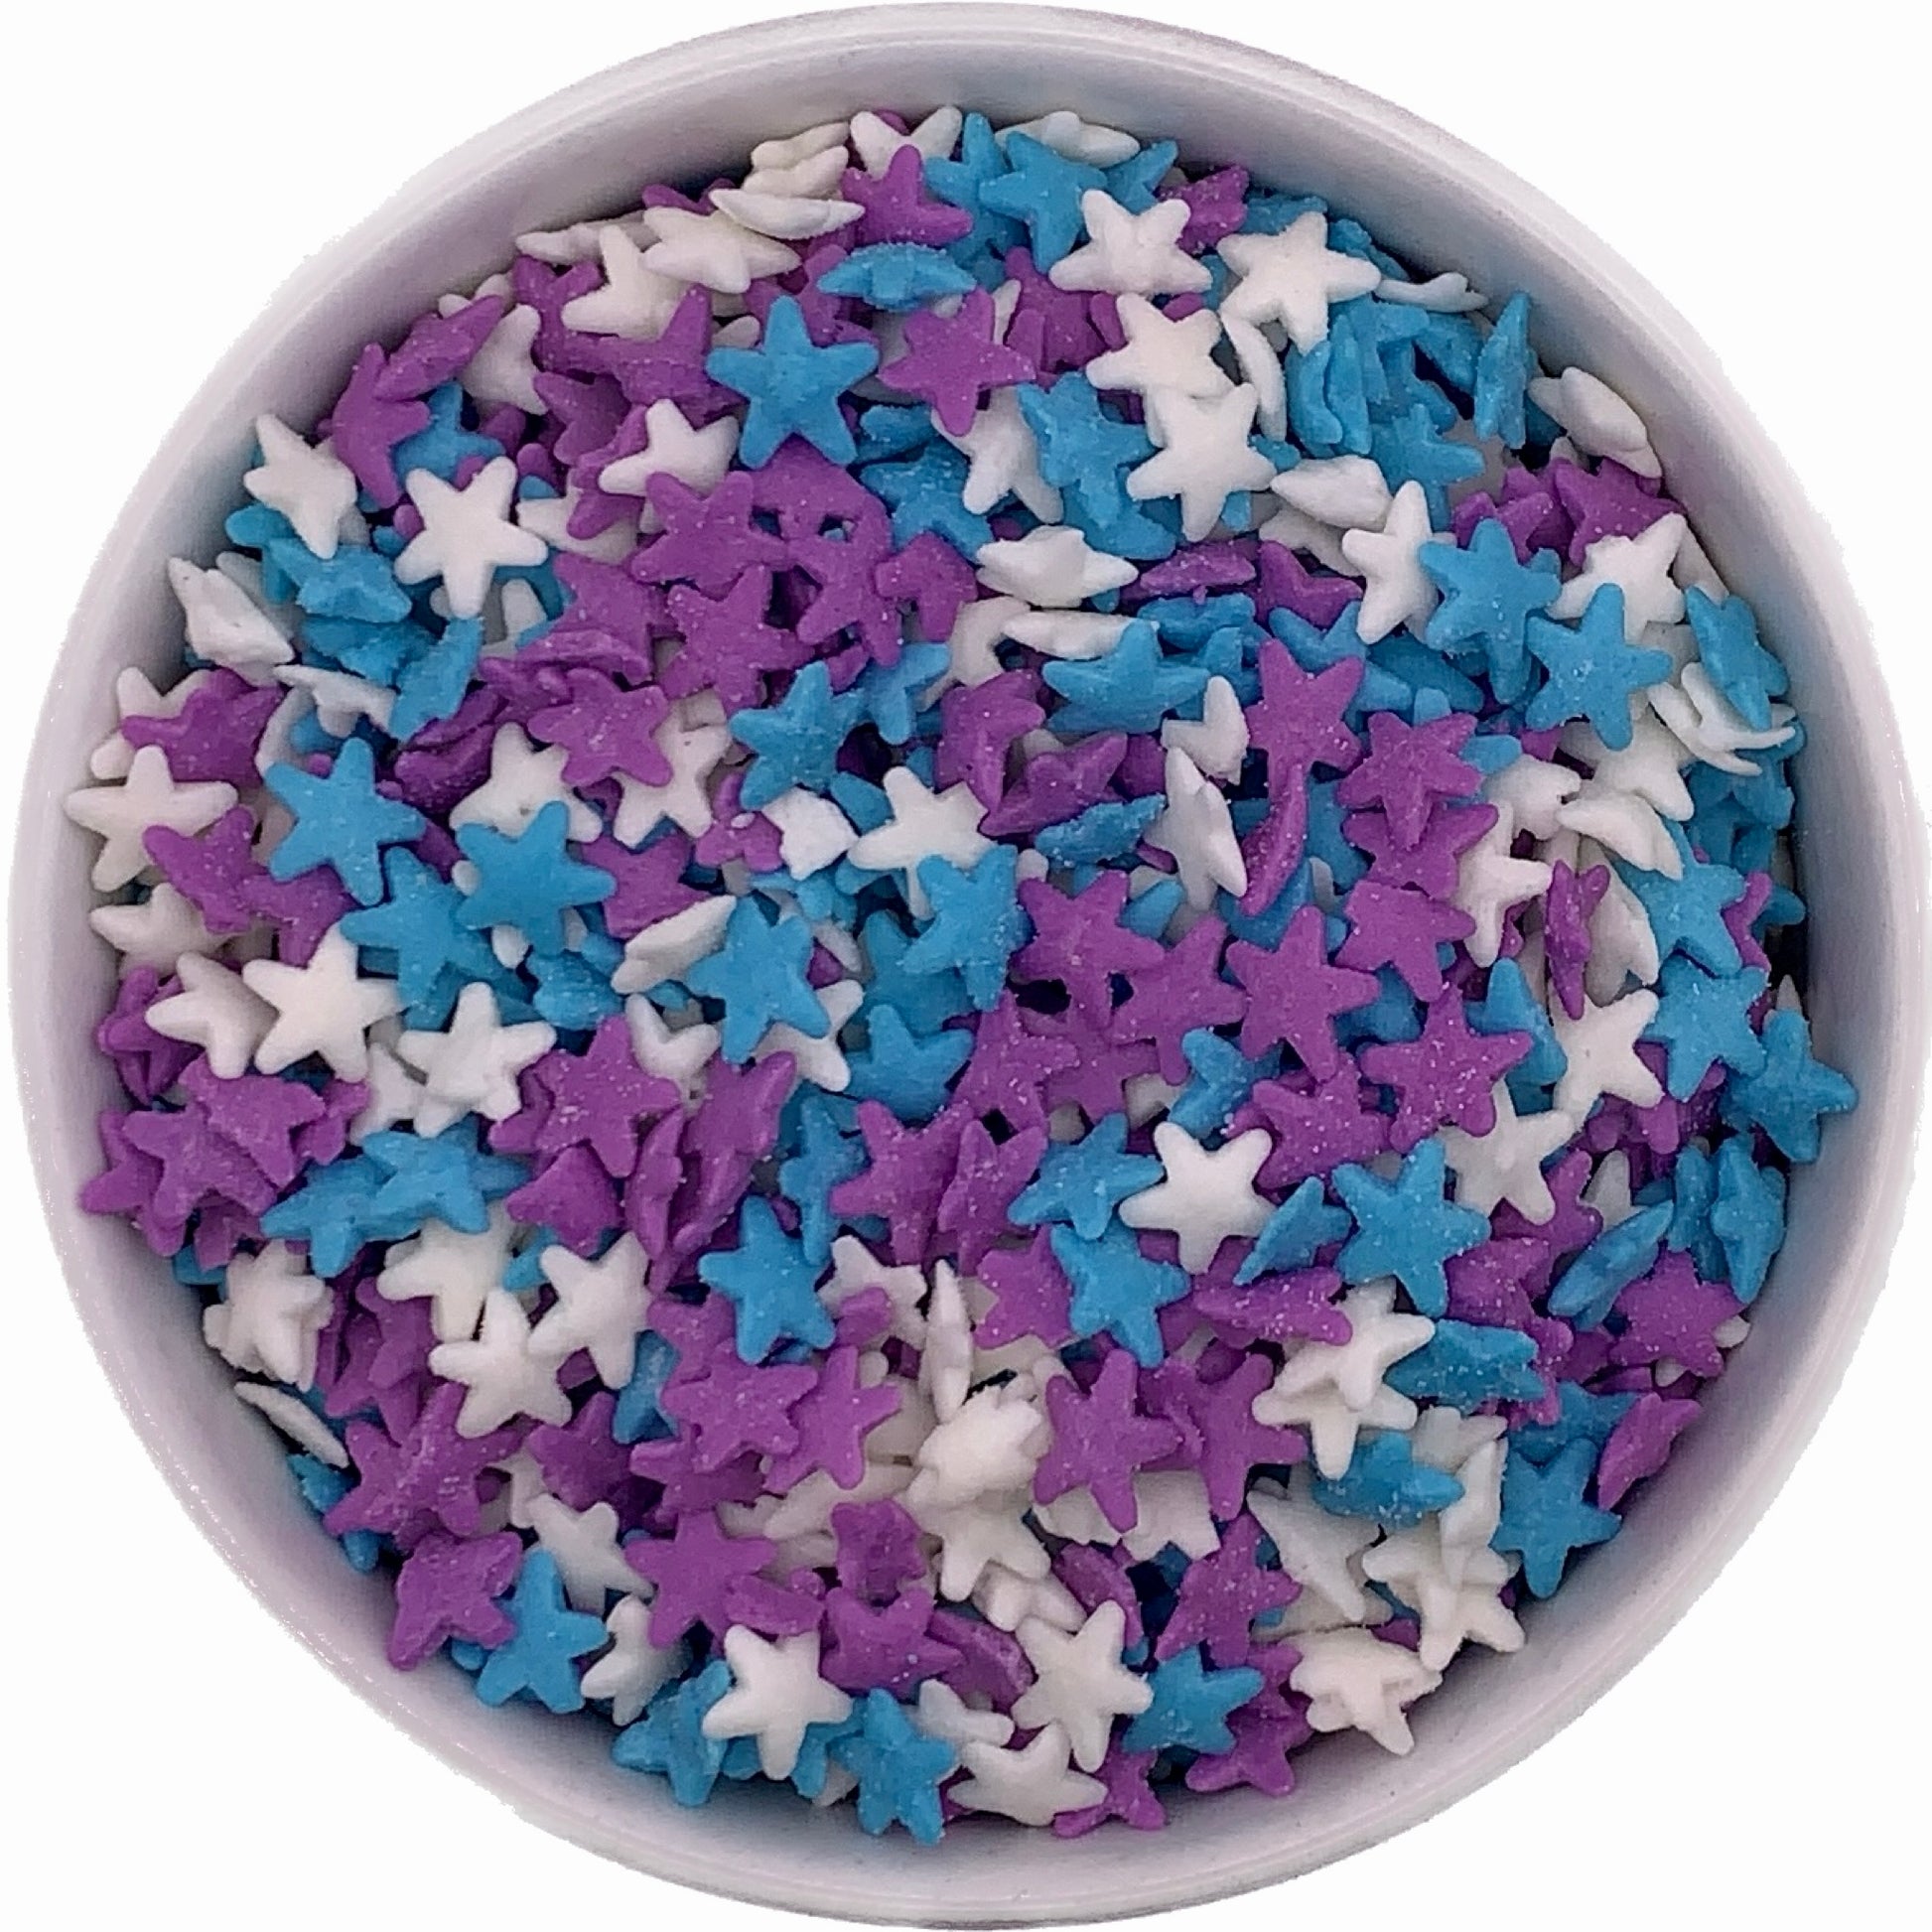 Blue, Purple, and White Star Shaped Sprinkles